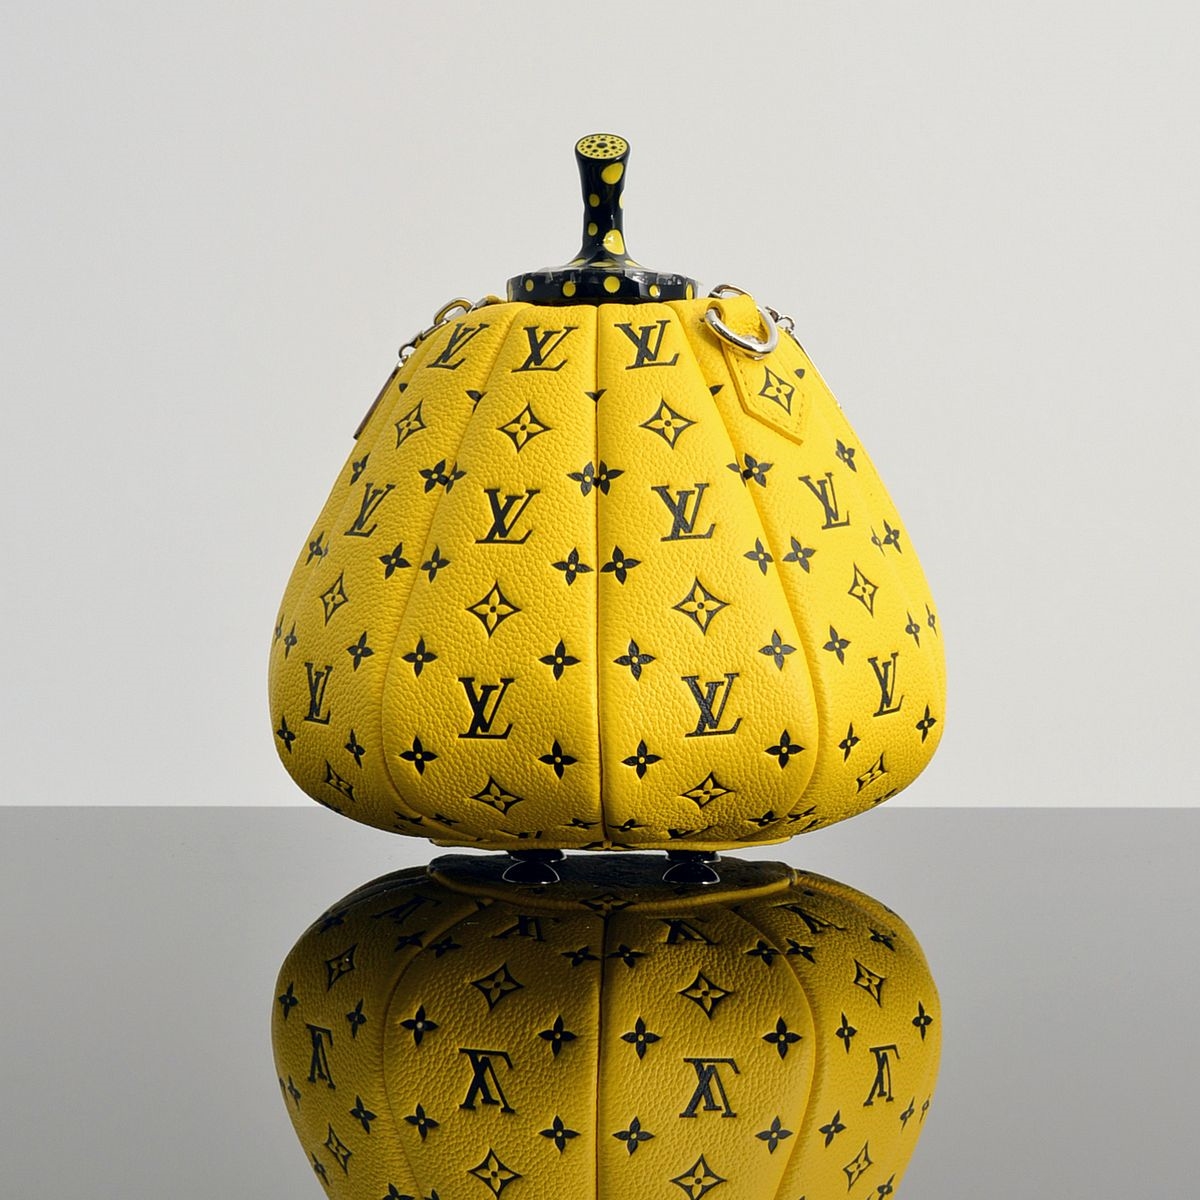 Sold at Auction: A Louis Vuitton Limited Edition Yayoi Kusama Wallet